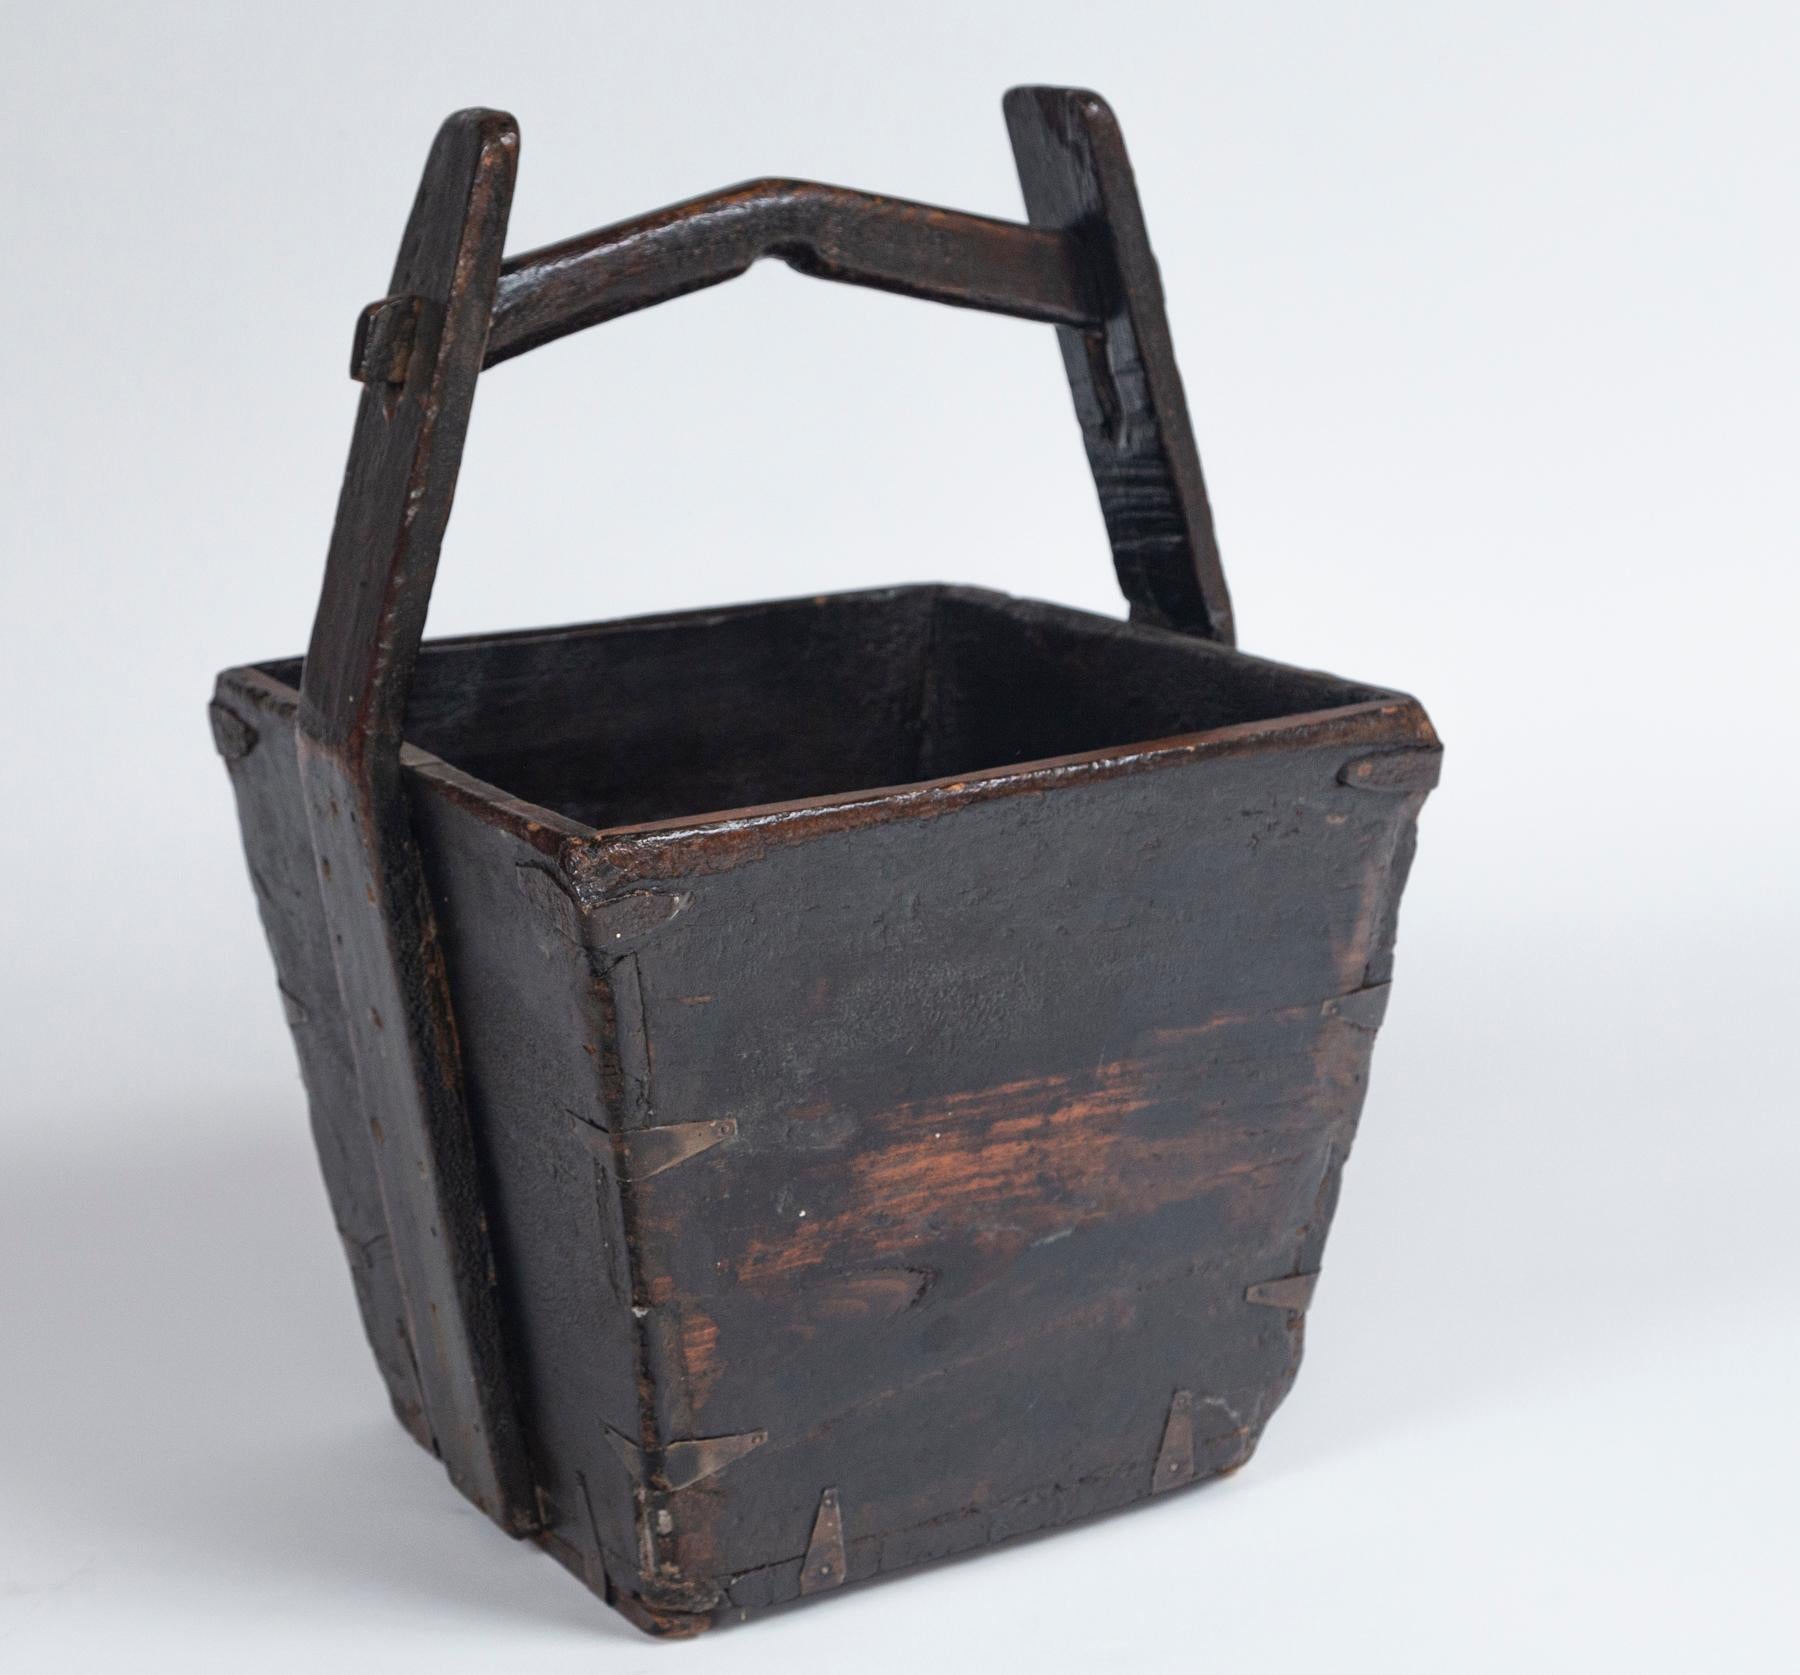 Antique Chinese Water Bucket, early 20th Century. Aged patina with original iron fittings.